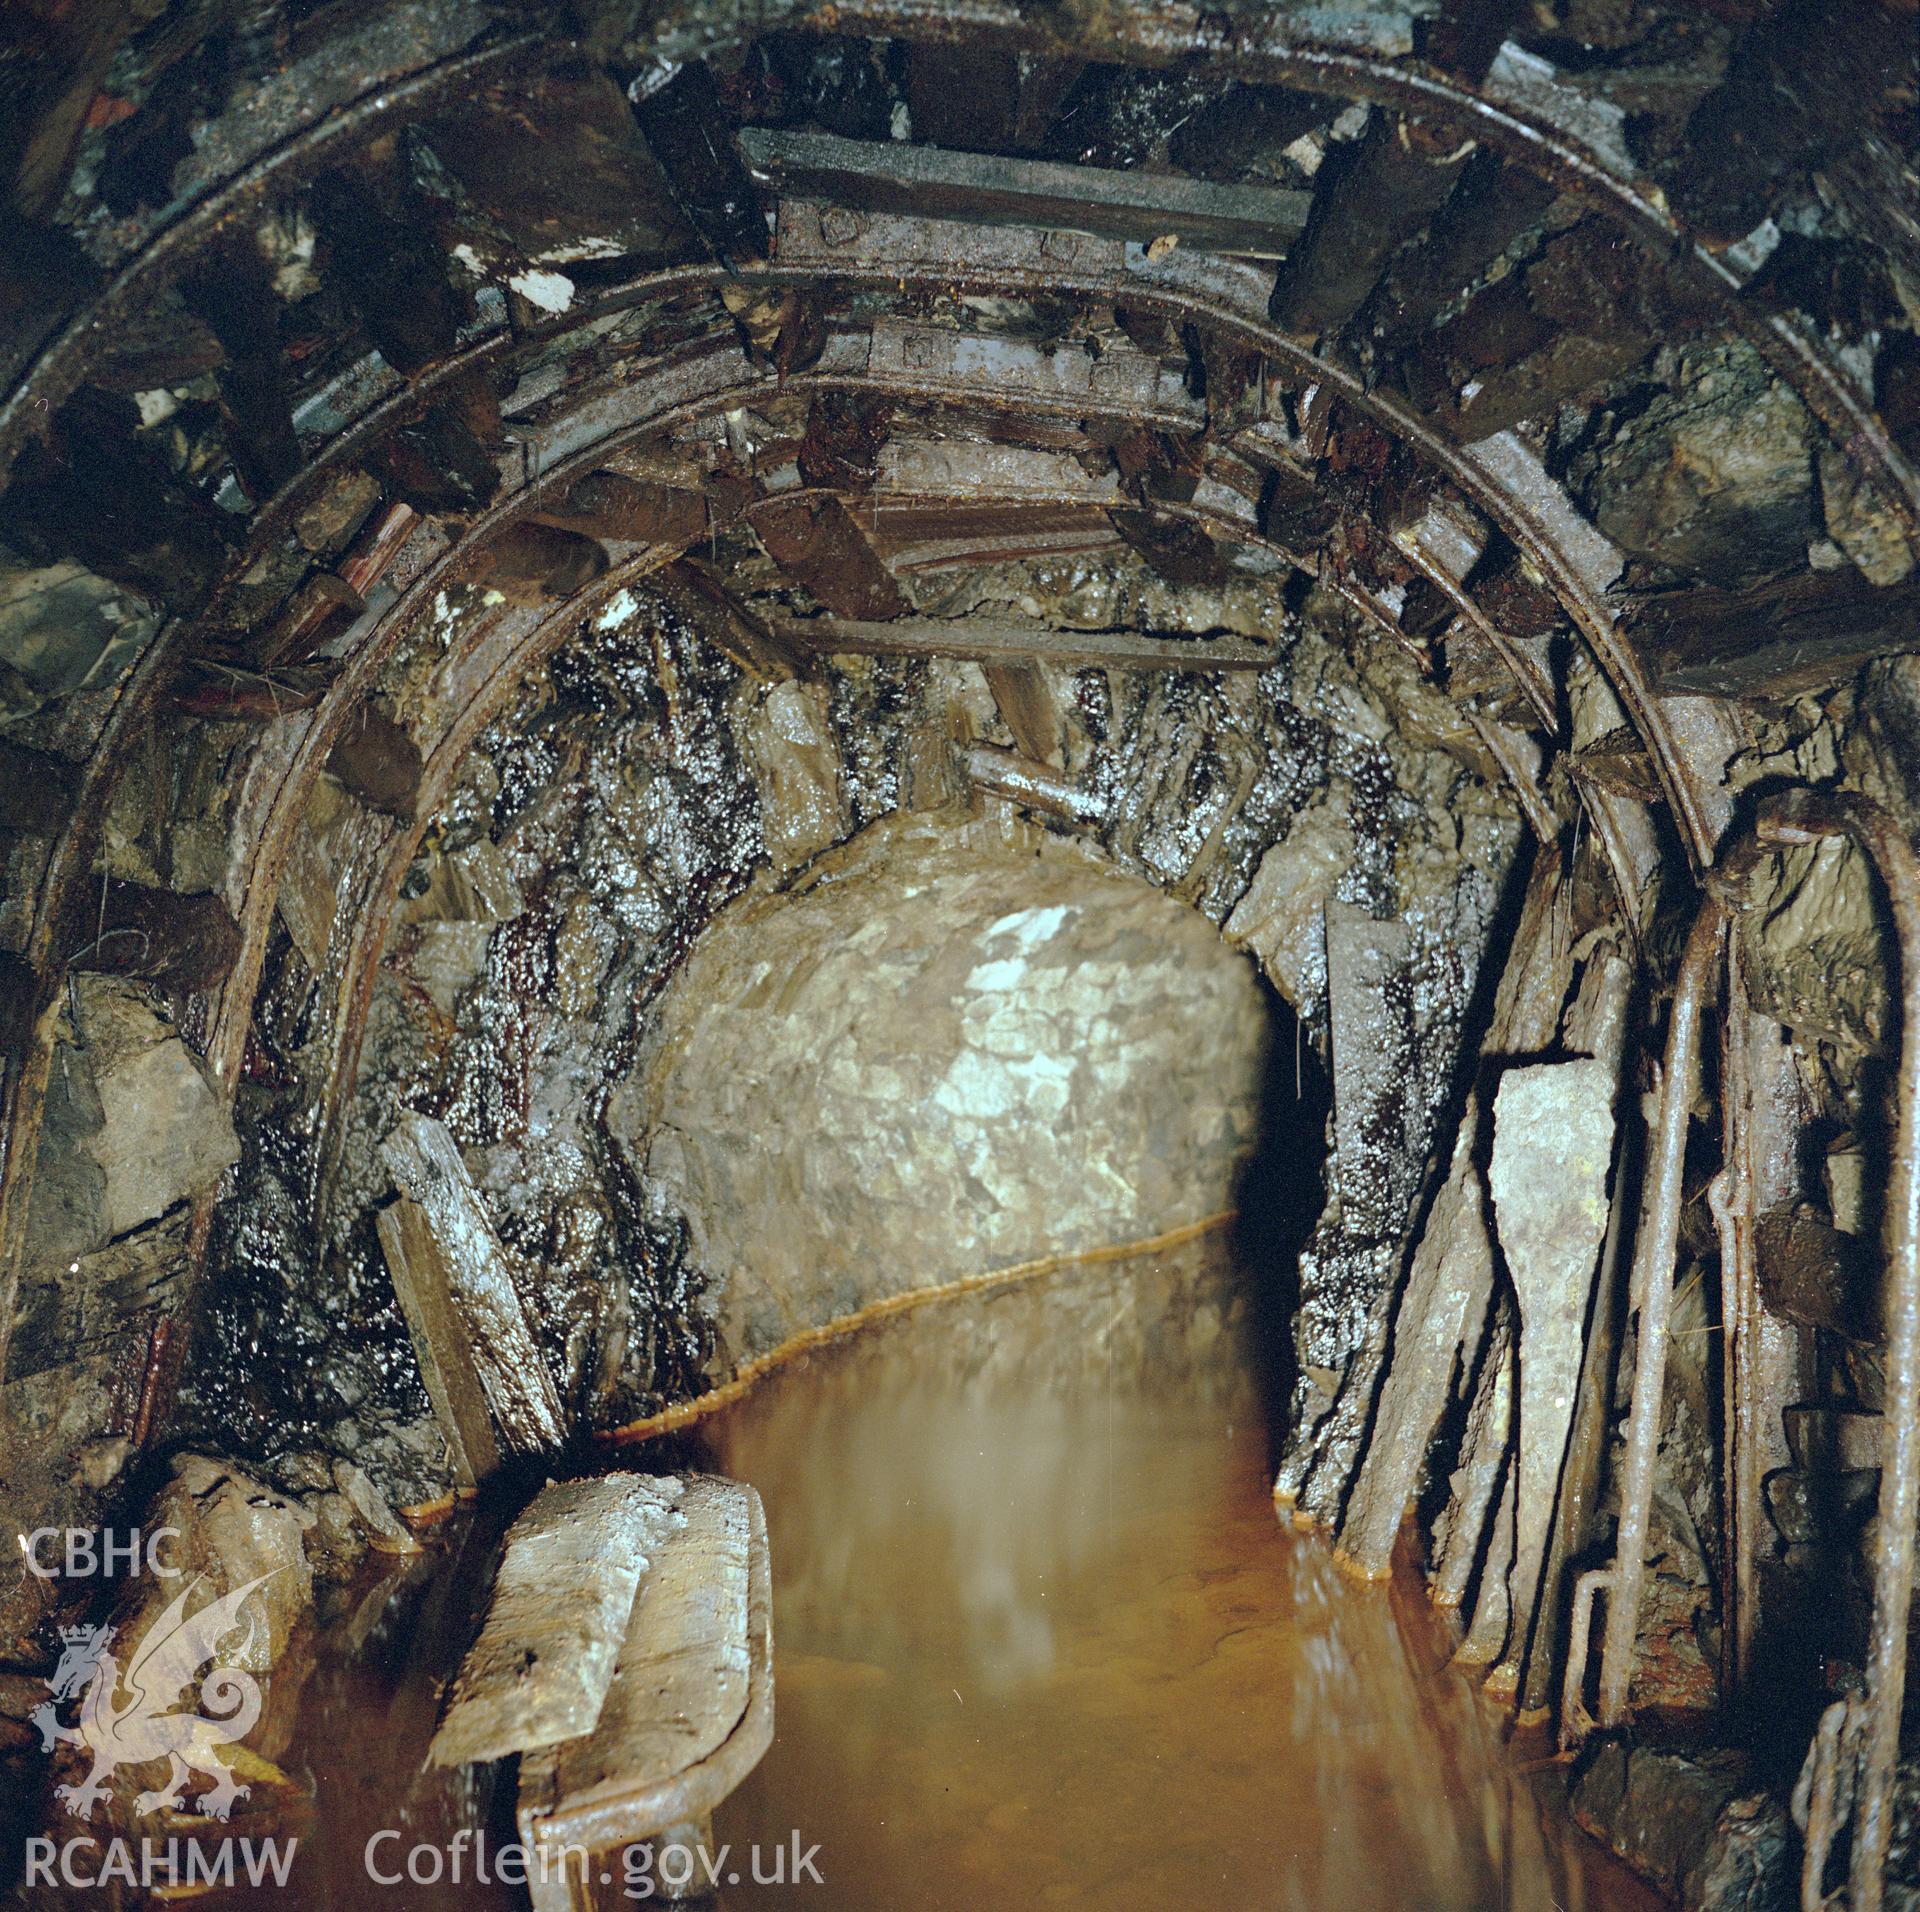 Digital copy of an acetate negative showing original entrance to Wood's level at Big Pit, from the John Cornwell Collection.